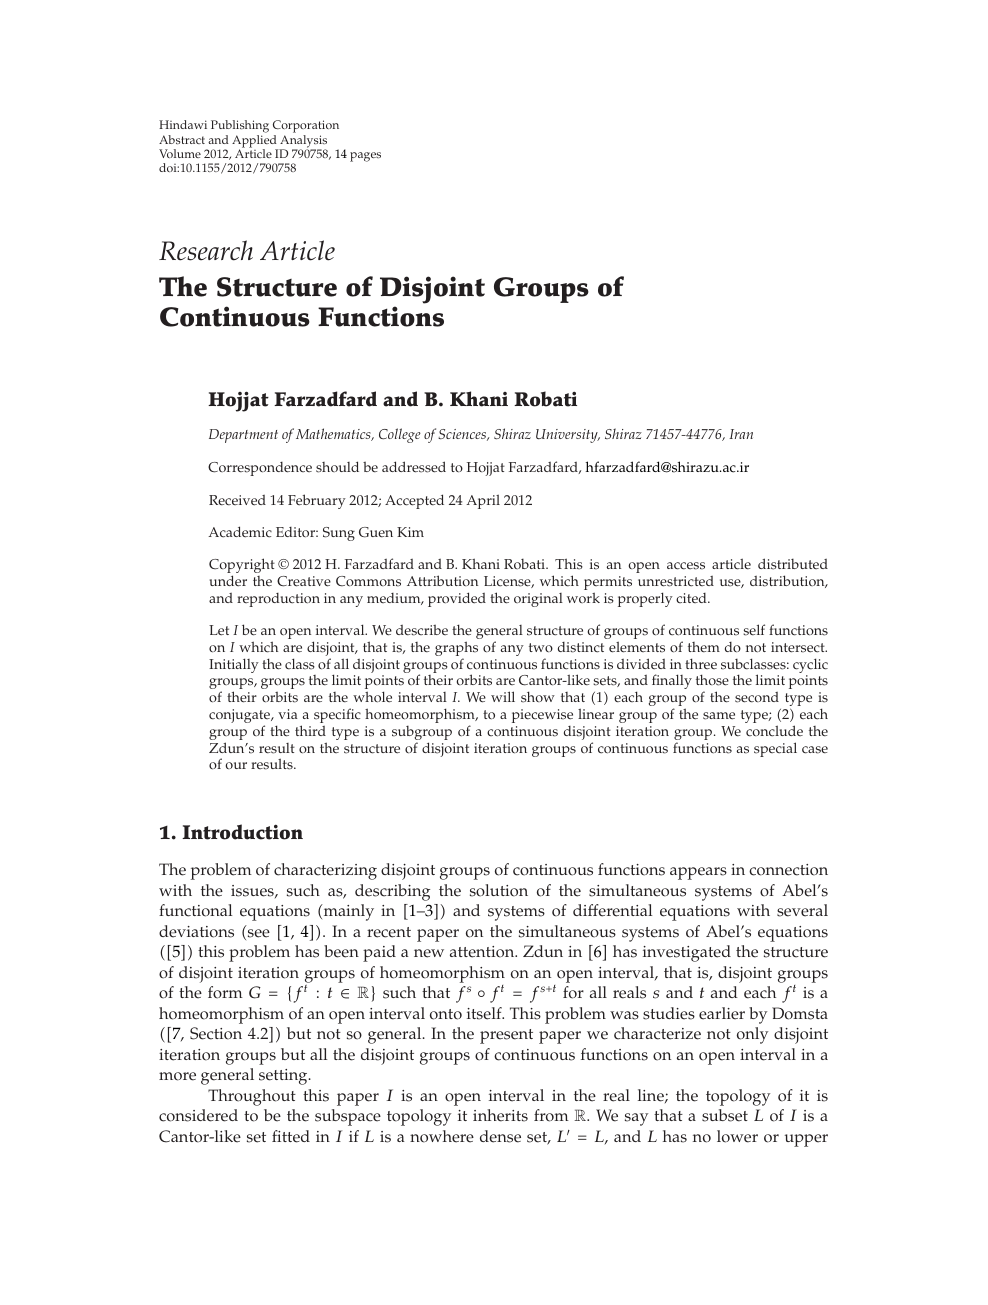 The Structure Of Disjoint Groups Of Continuous Functions Topic Of Research Paper In Mathematics Download Scholarly Article Pdf And Read For Free On Cyberleninka Open Science Hub